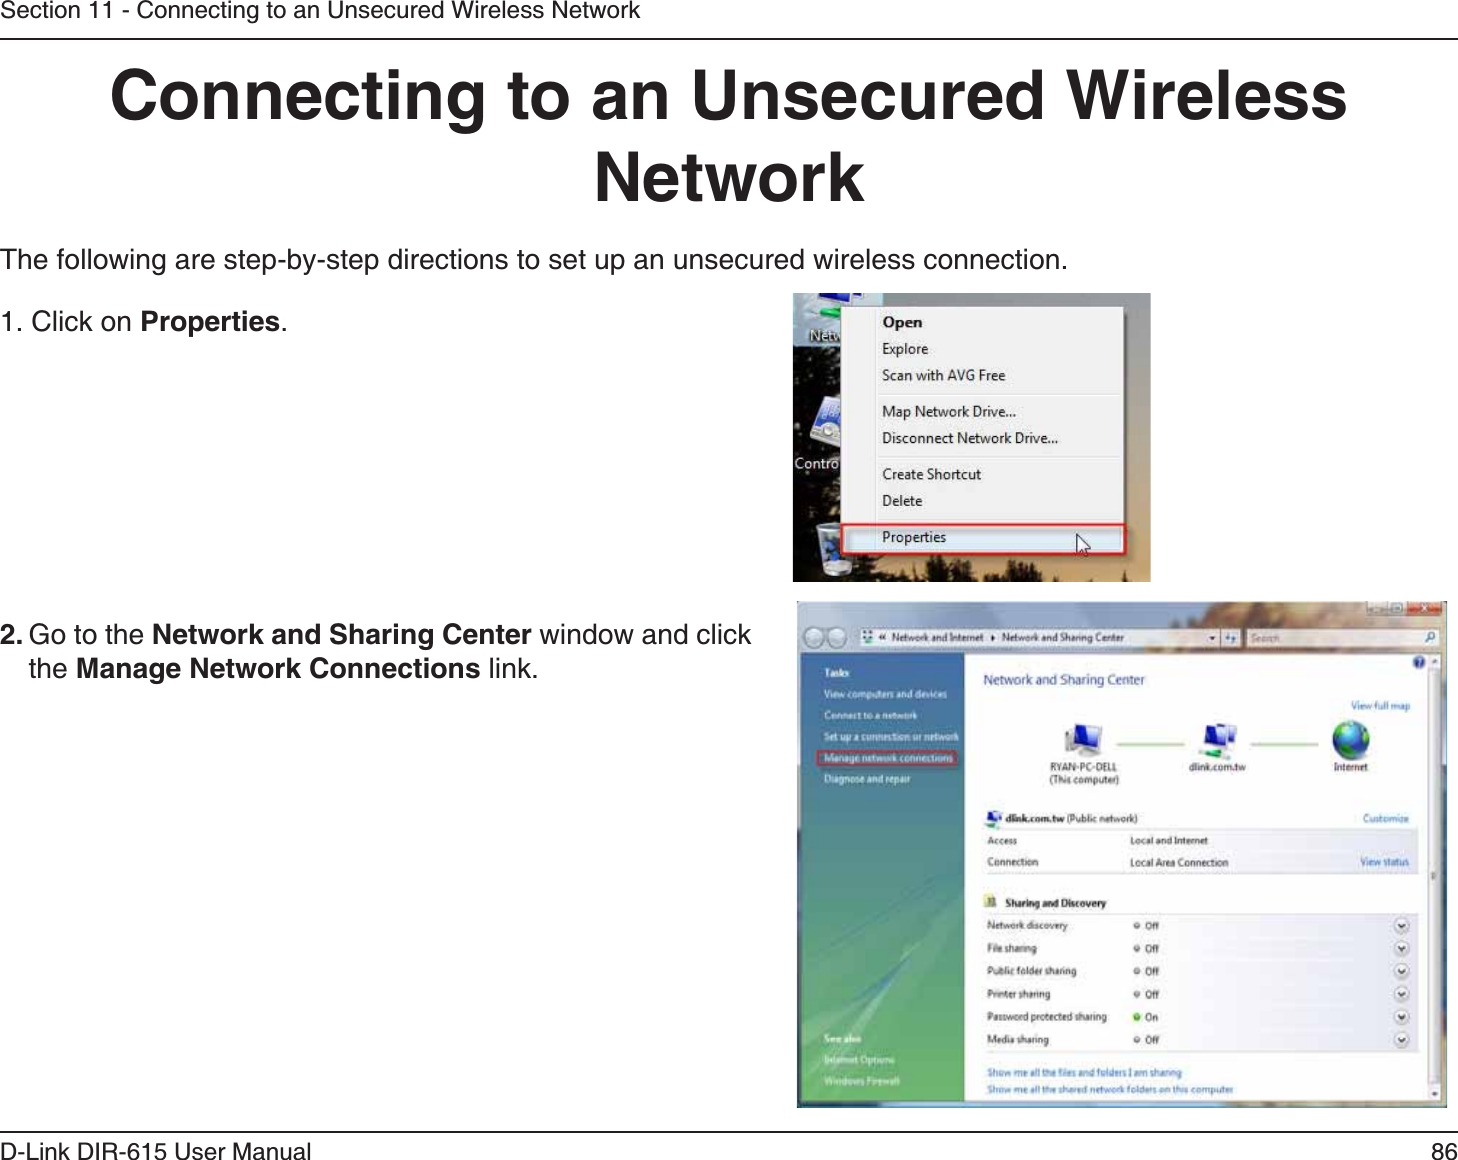 86D-Link DIR-615 User ManualSection 11 - Connecting to an Unsecured Wireless Network%QPPGEVKPIVQCP7PUGEWTGF9KTGNGUU0GVYQTMThe following are step-by-step directions to set up an unsecured wireless connection. Go to the 0GVYQTMCPF5JCTKPI%GPVGT window and click the /CPCIG0GVYQTM%QPPGEVKQPU link. 1. Click on 2TQRGTVKGU.     